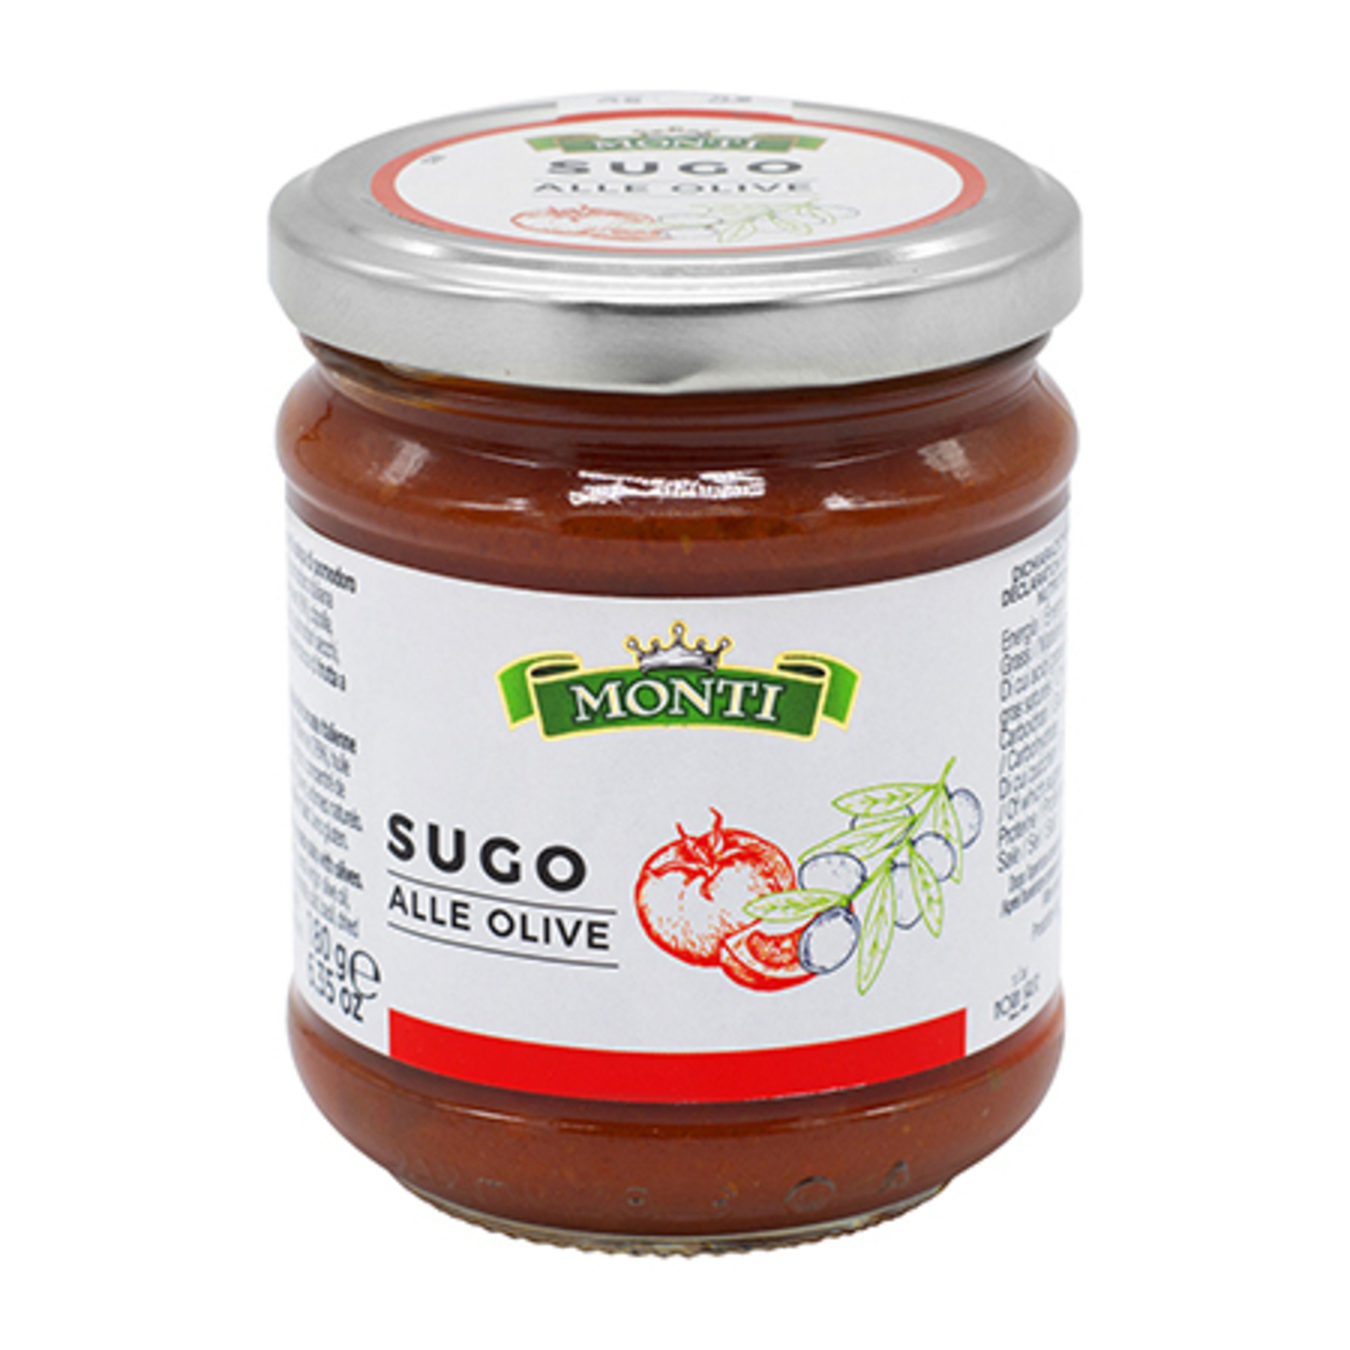 Monti tomato sauce with olives 180g